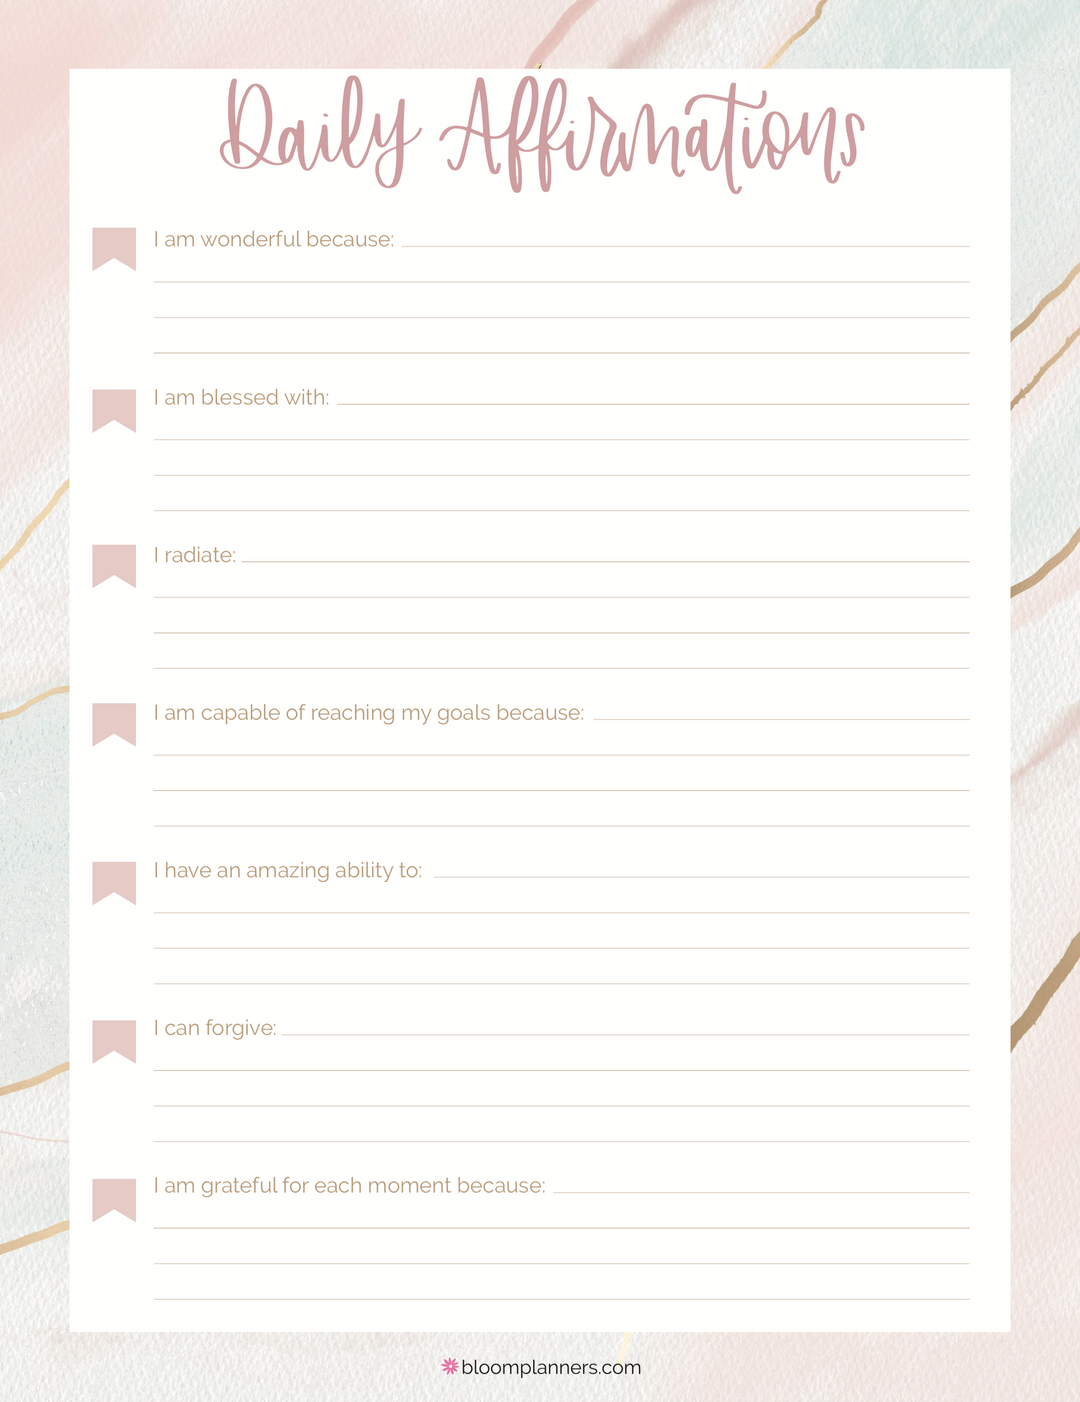 daily affirmations printable in pink